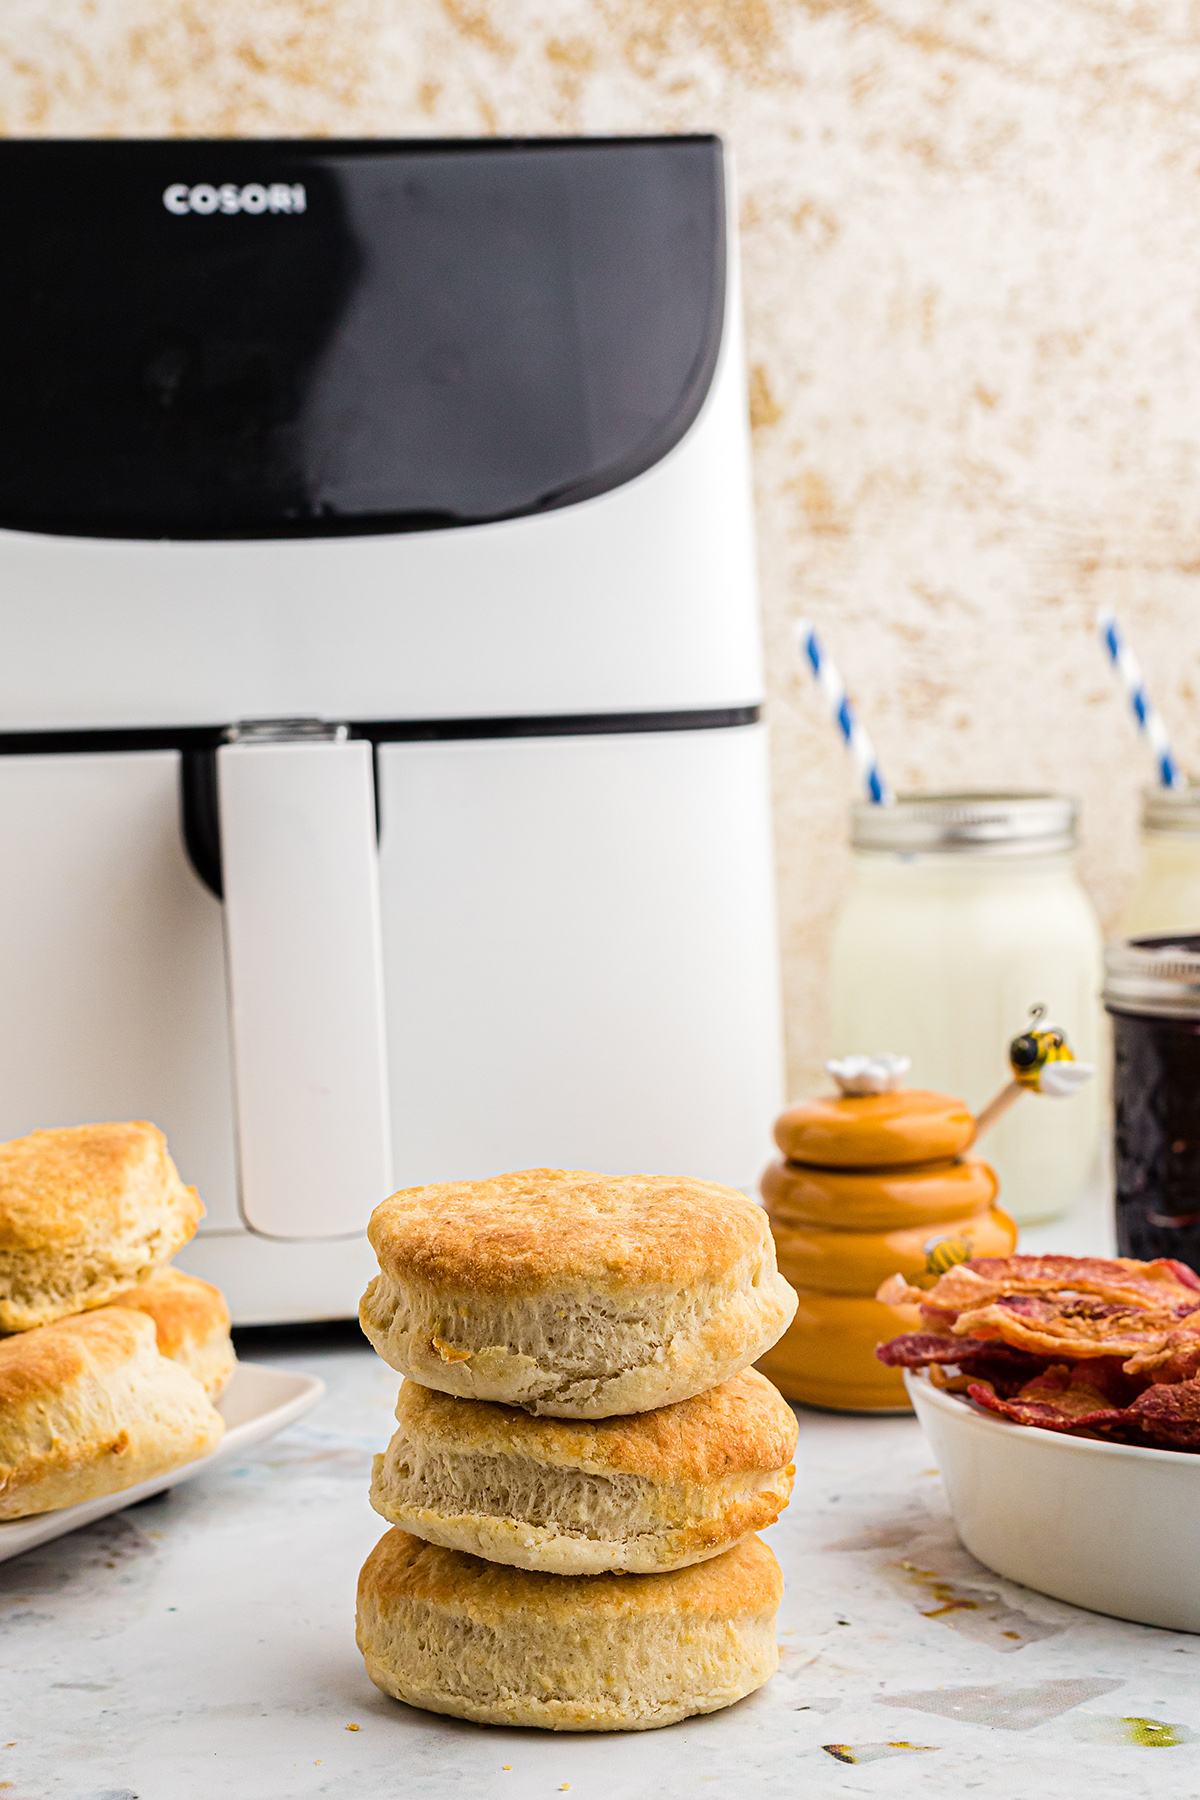 Biscuits stacked up in front of an air fryer.